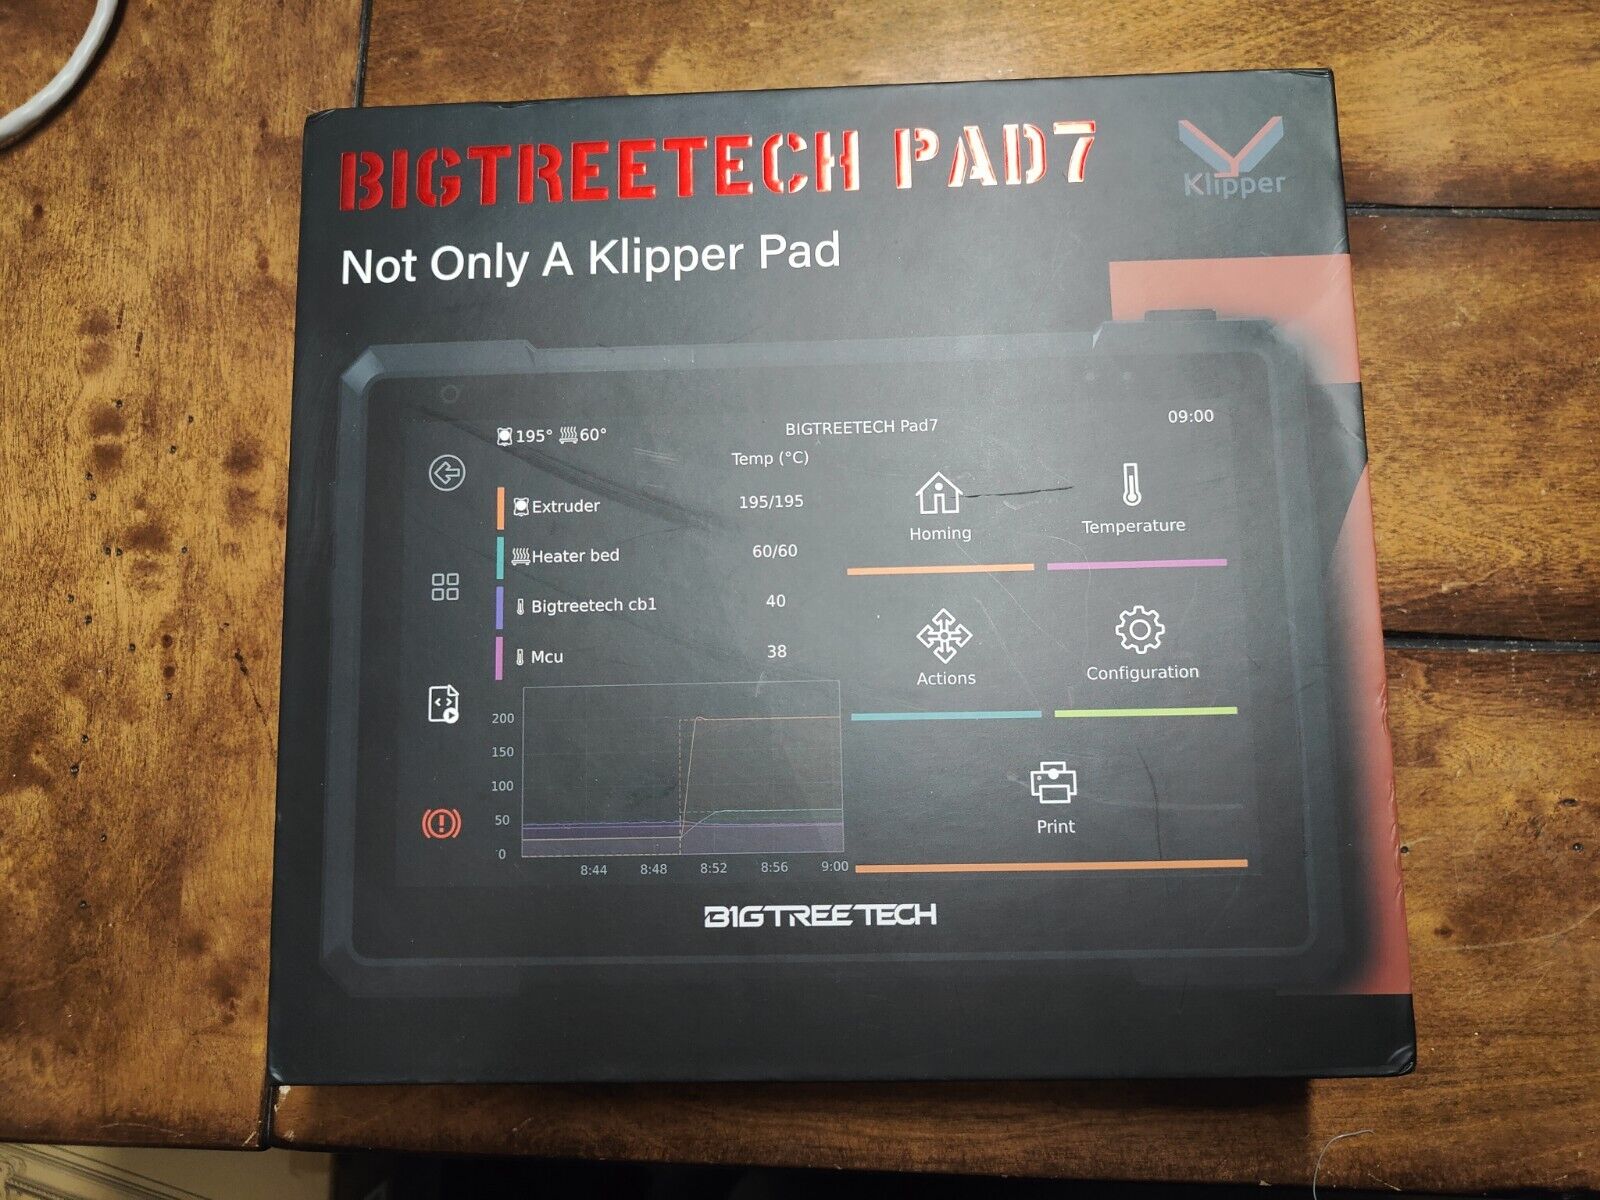 BIGTREETECH Pad 7 Klipper Touch Screen 7in 3D Printing Smart Pad Great Condition